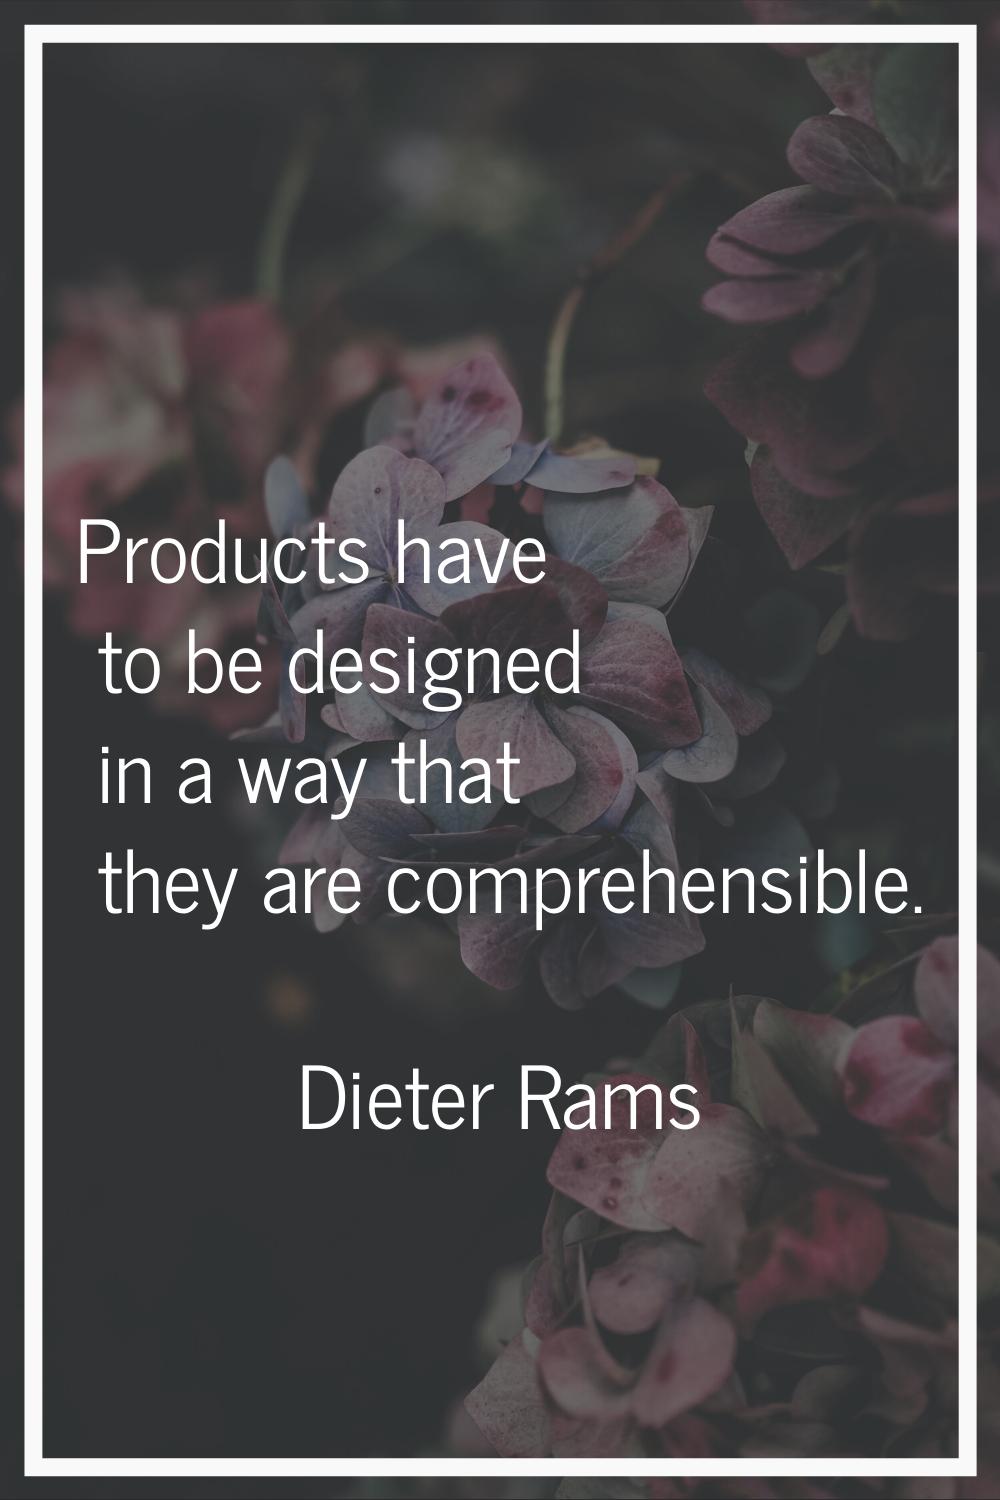 Products have to be designed in a way that they are comprehensible.